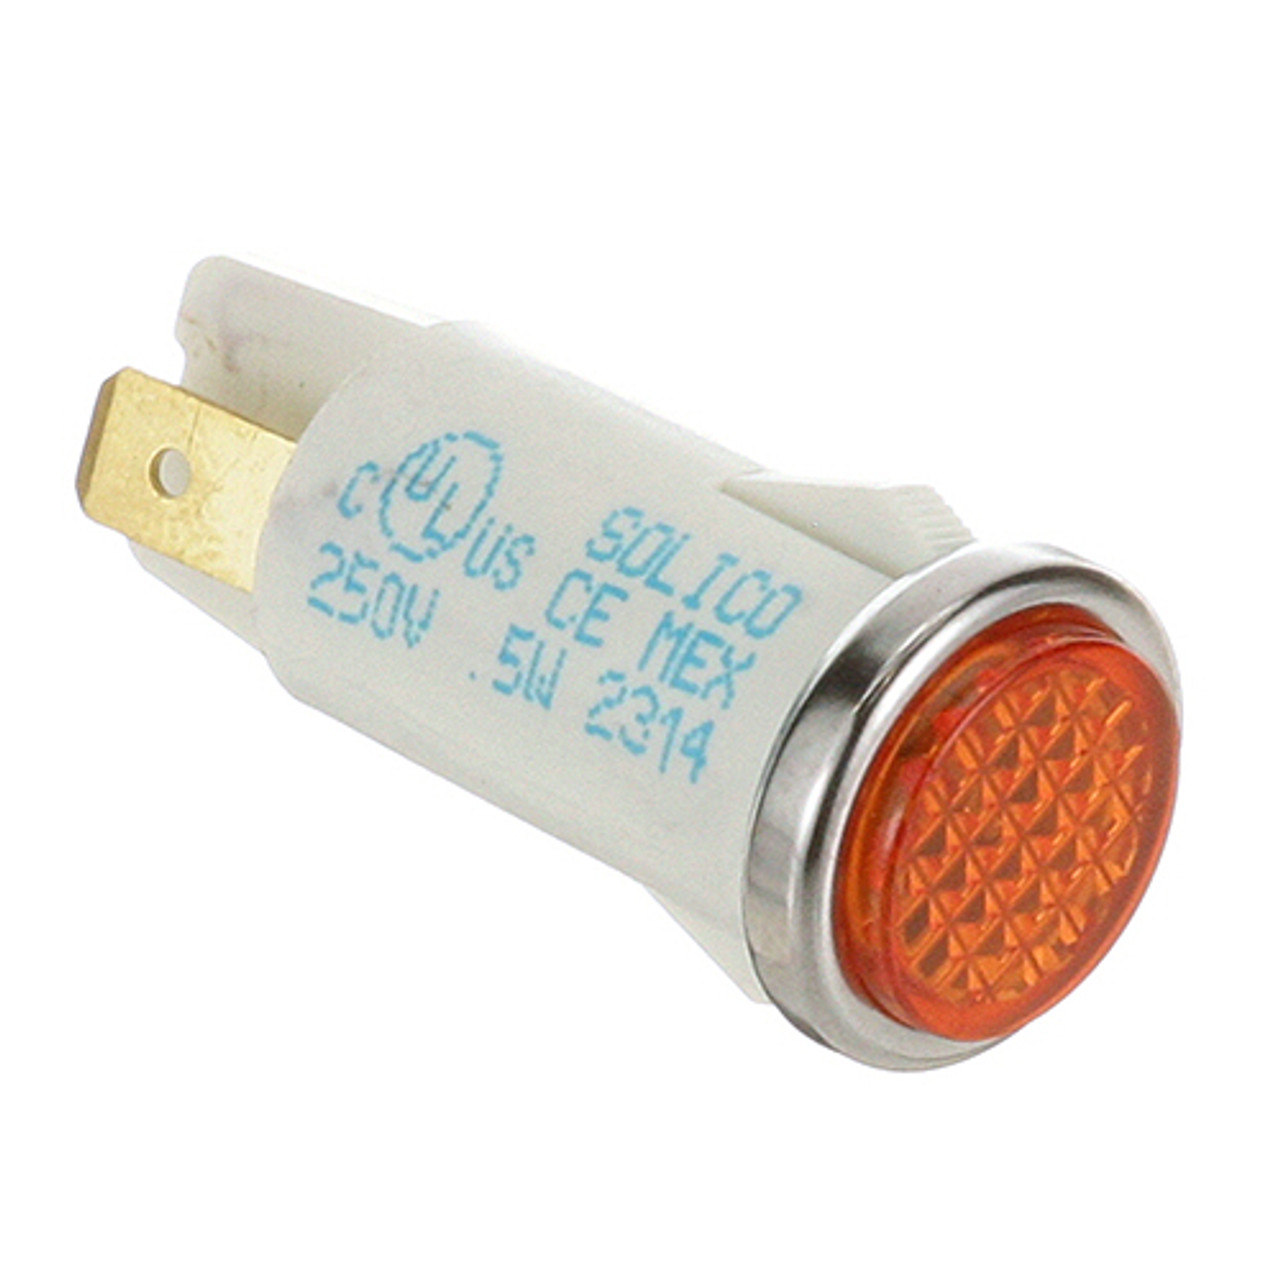 Light,Indicator(1/2",Amb R,Ff) - Replacement Part For Star Mfg WS-50516